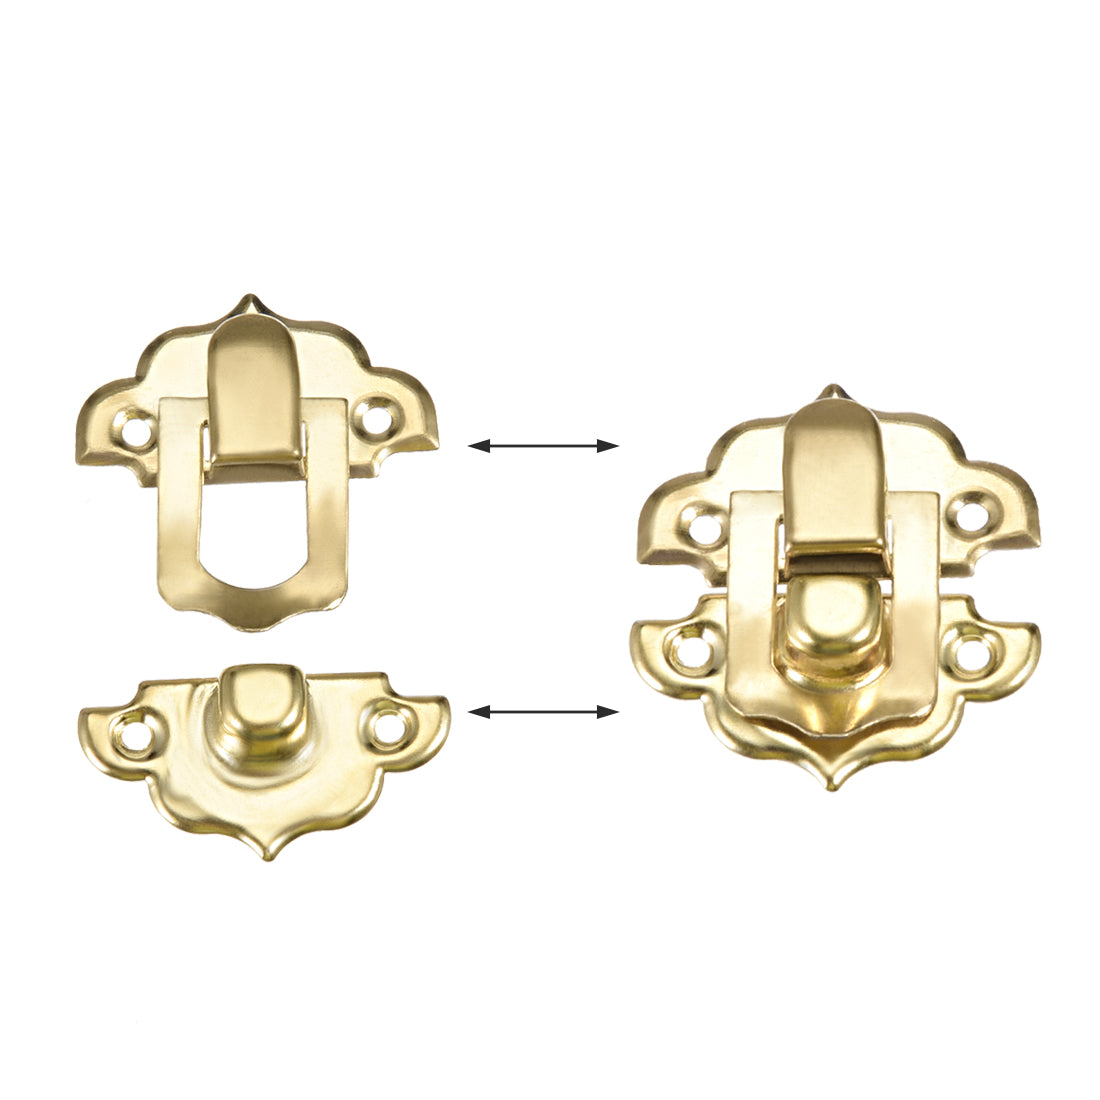 uxcell Uxcell Box Latch, Small Size Golden Decorative Hasp Jewelry cases Catch w Screws 20 Sets